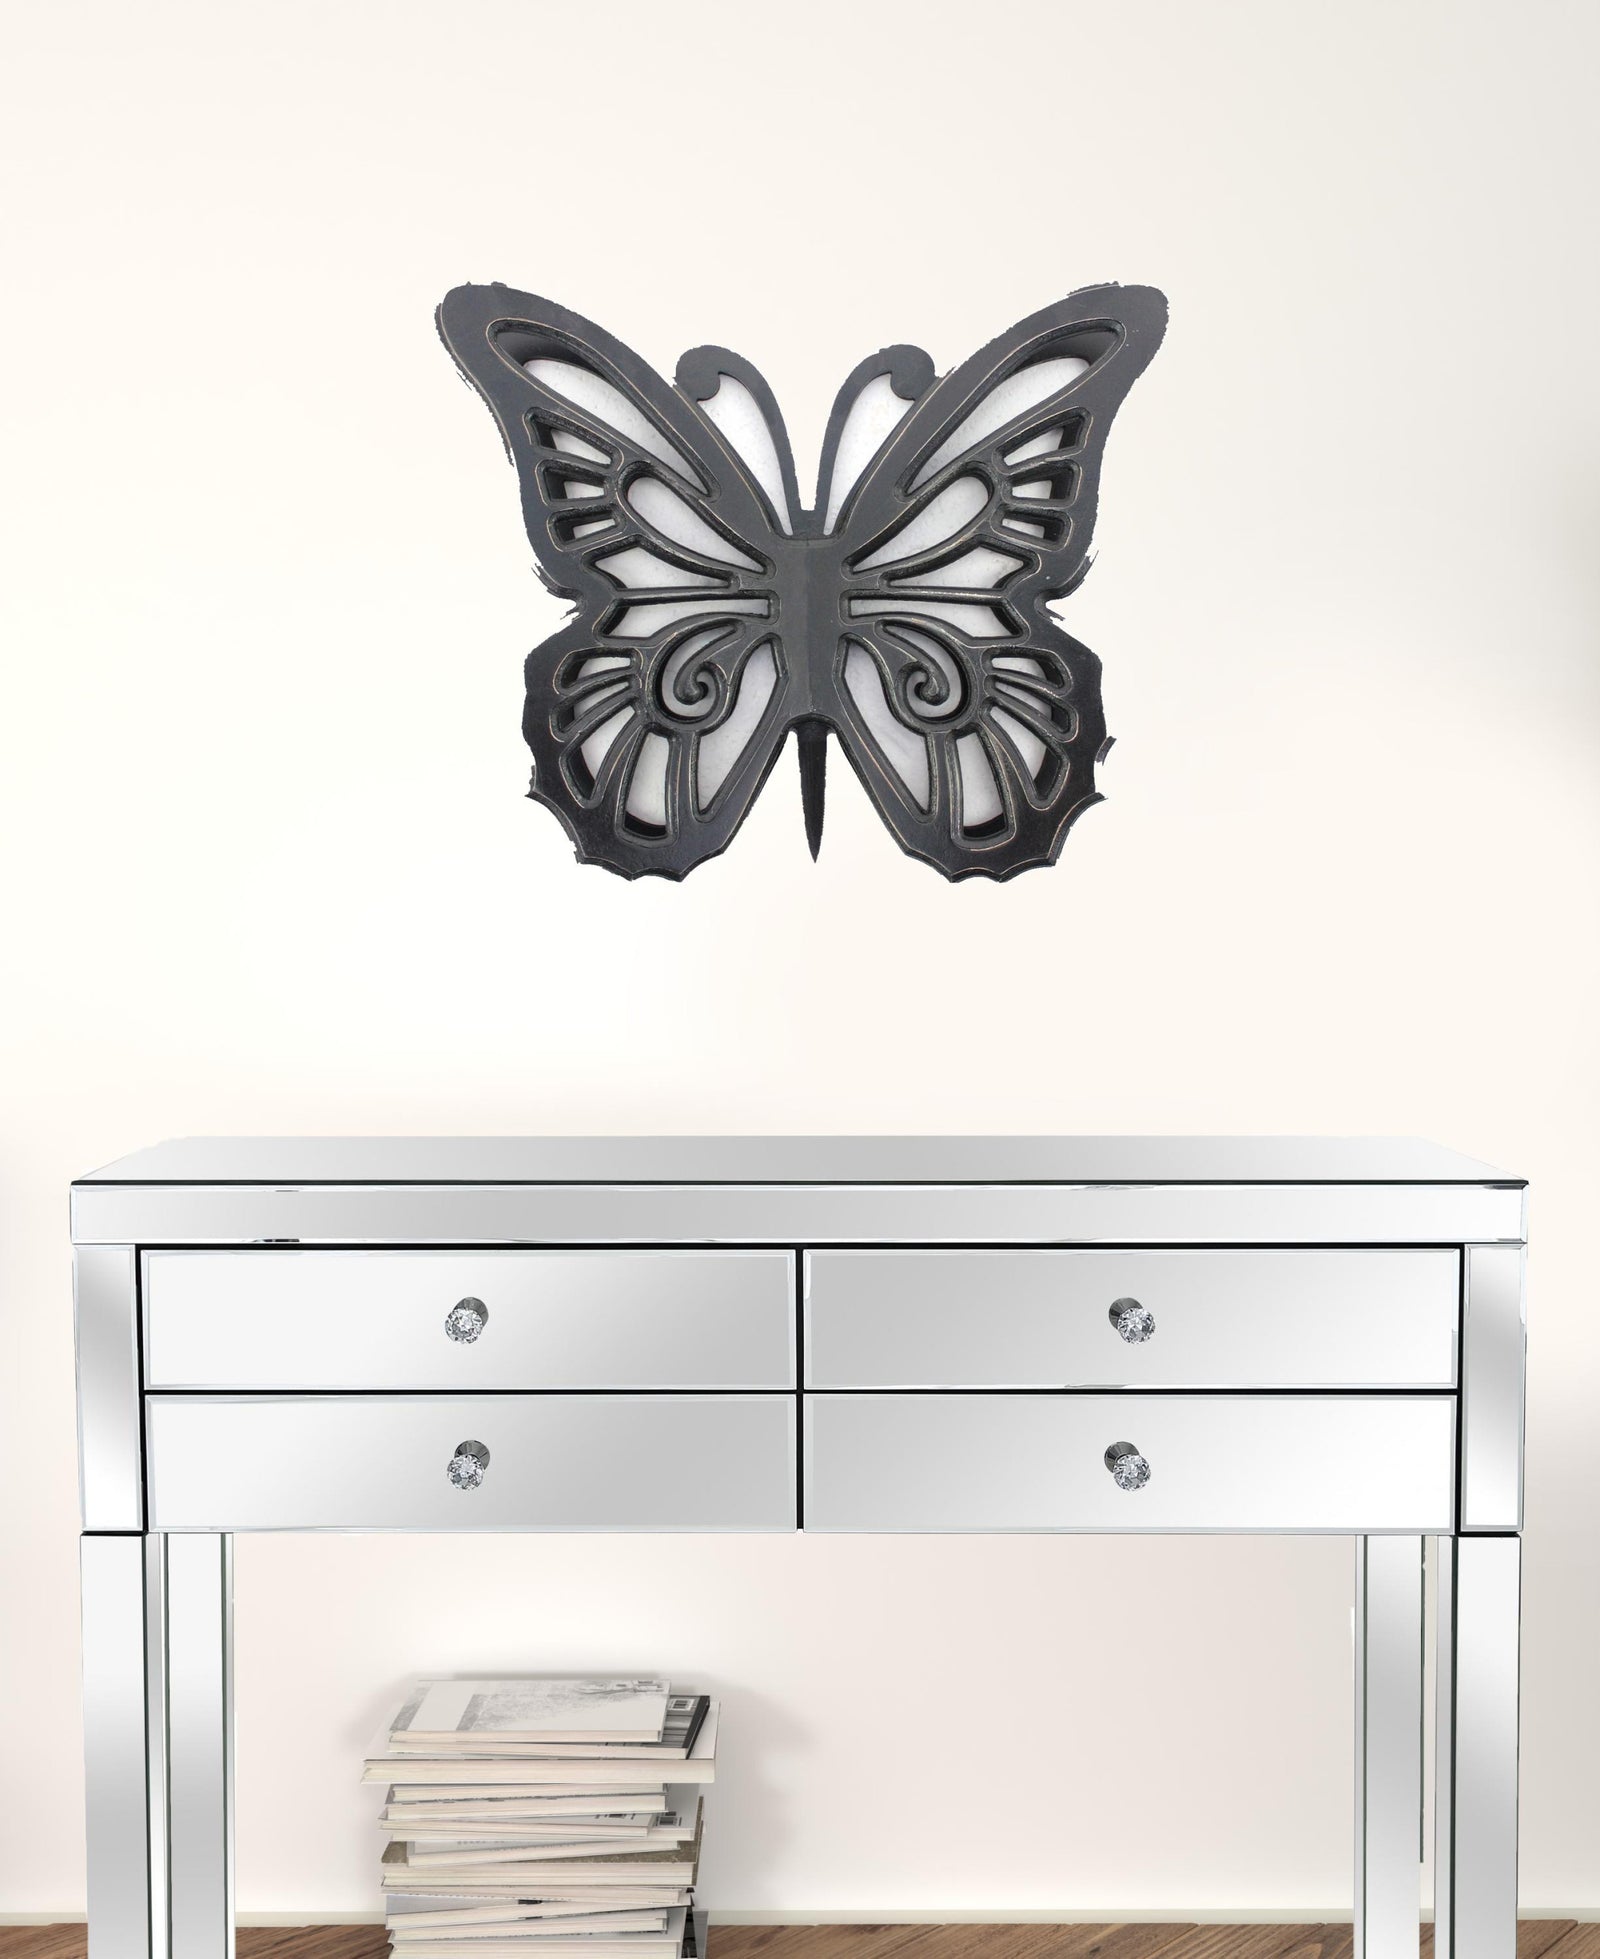 18.5" X 23.25" X 4.25" Black Rustic Butterfly Wooden Wall Decor